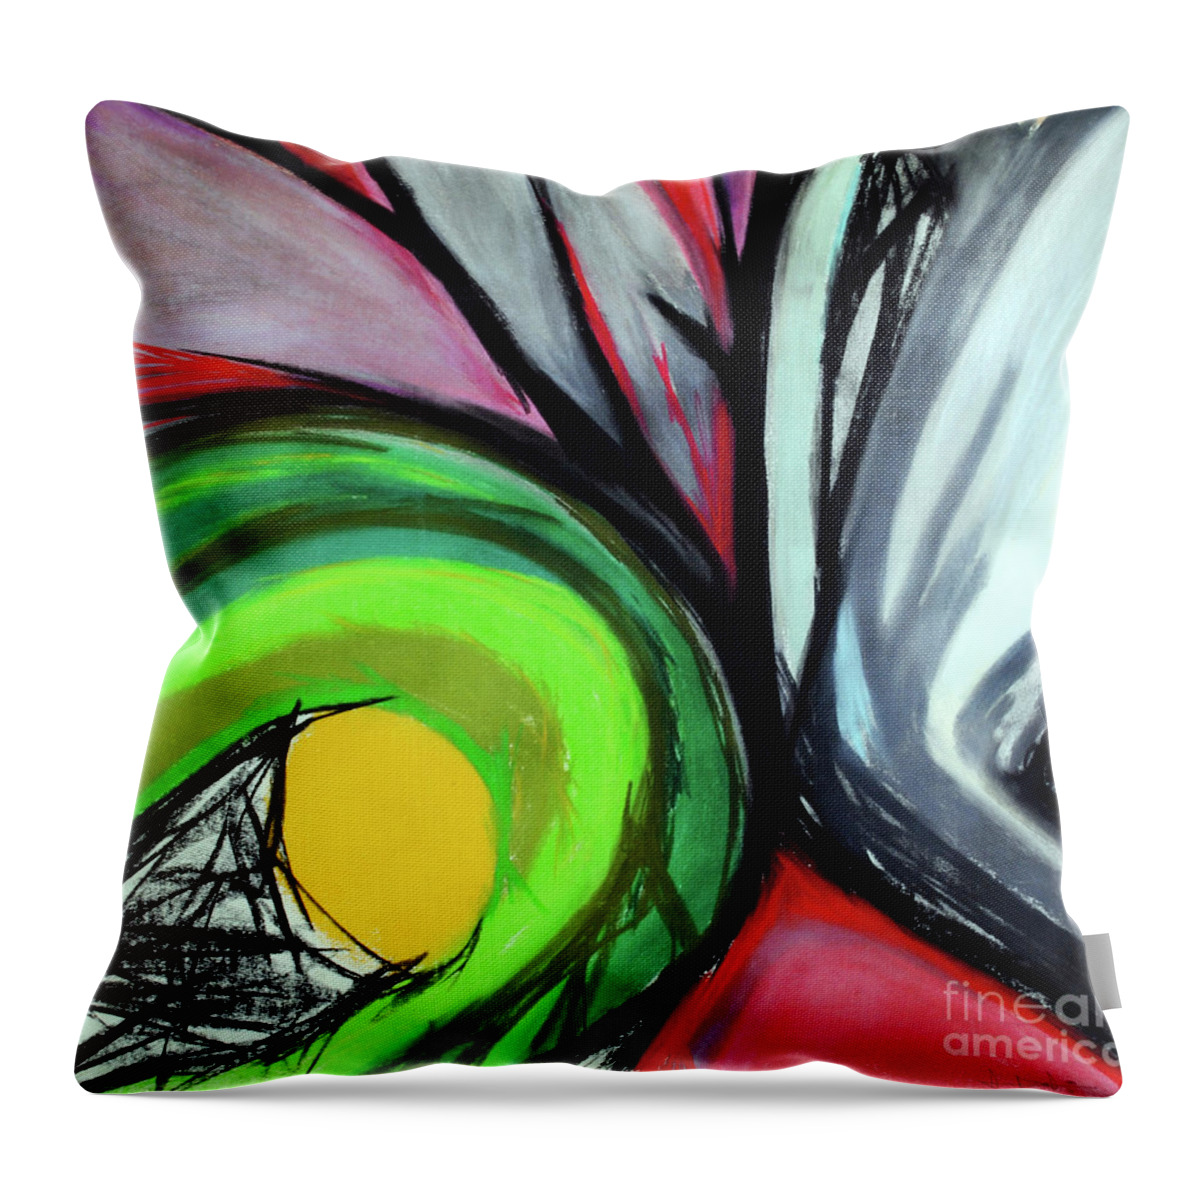 Abstract Throw Pillow featuring the painting Sun Burst by George D Gordon III